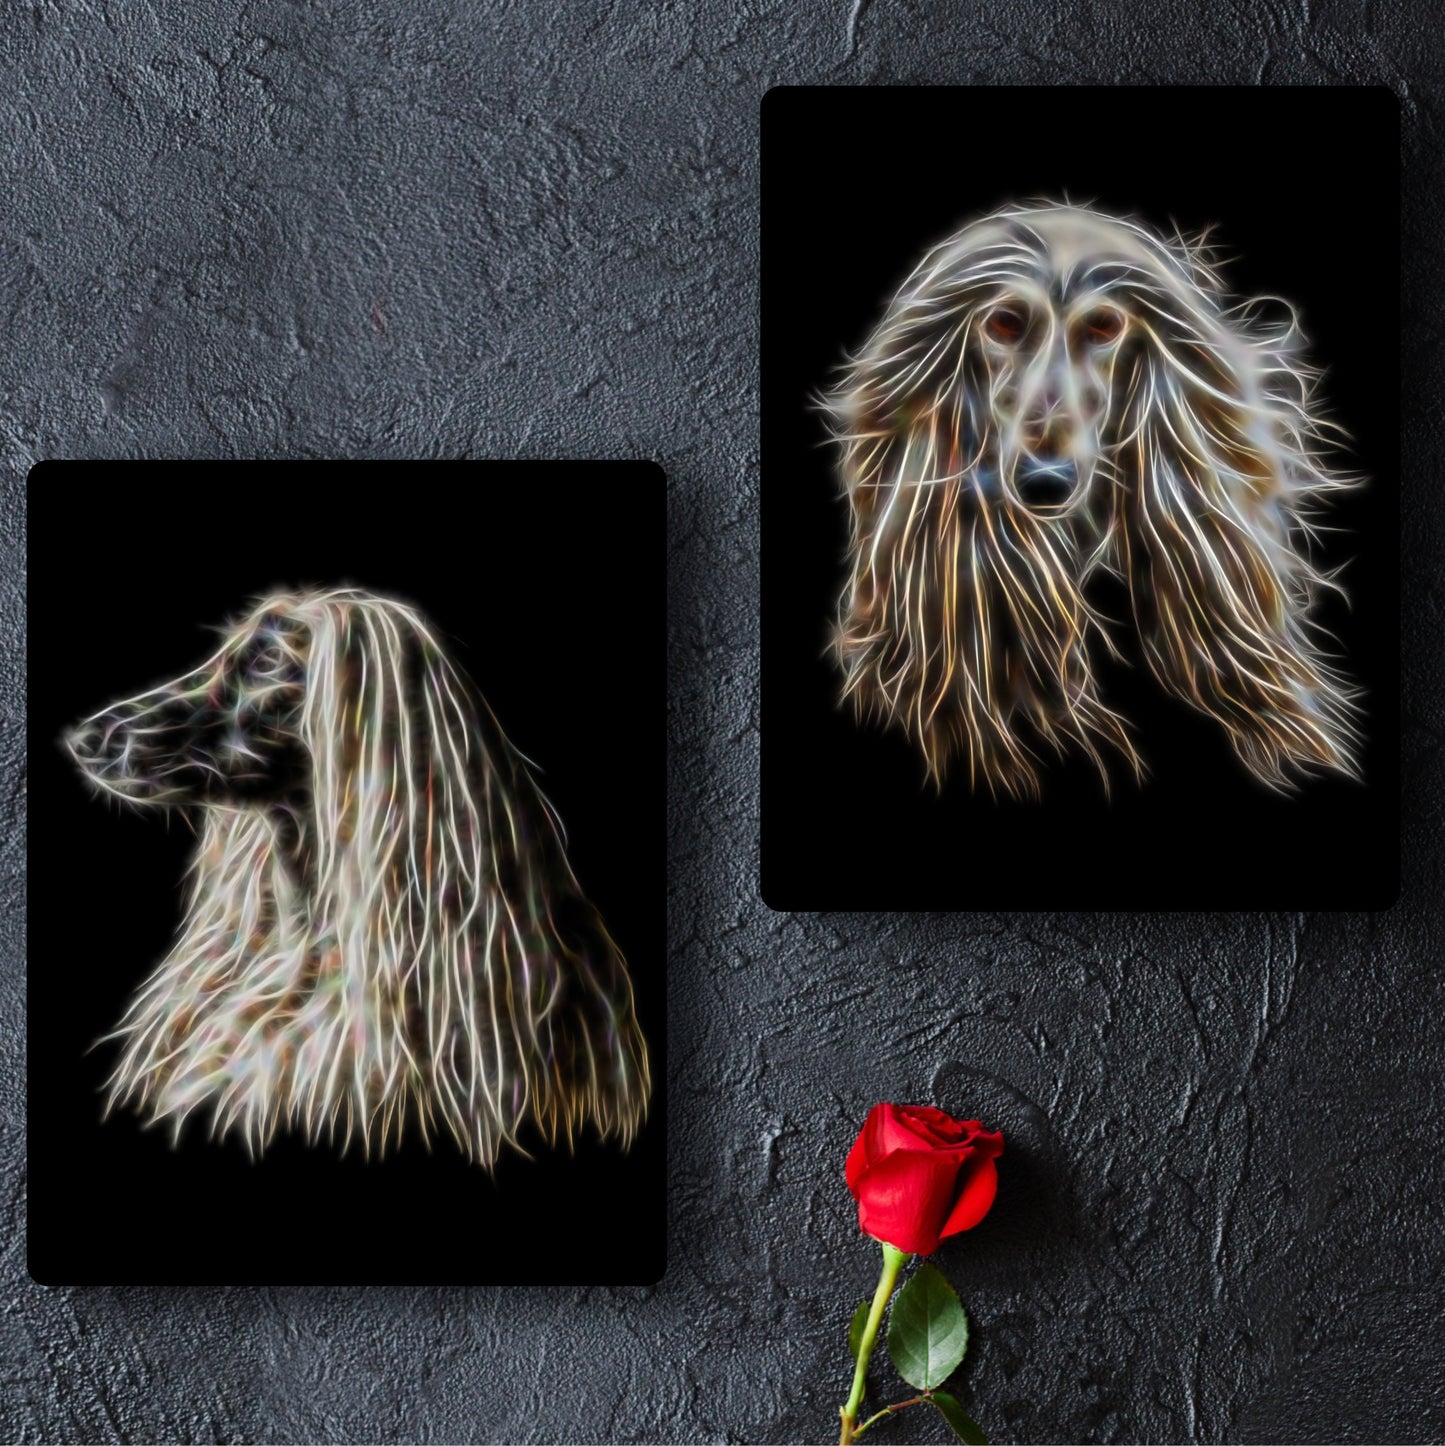 Afghan Hound Metal Wall Plaque with Stunning Fractal Art Design